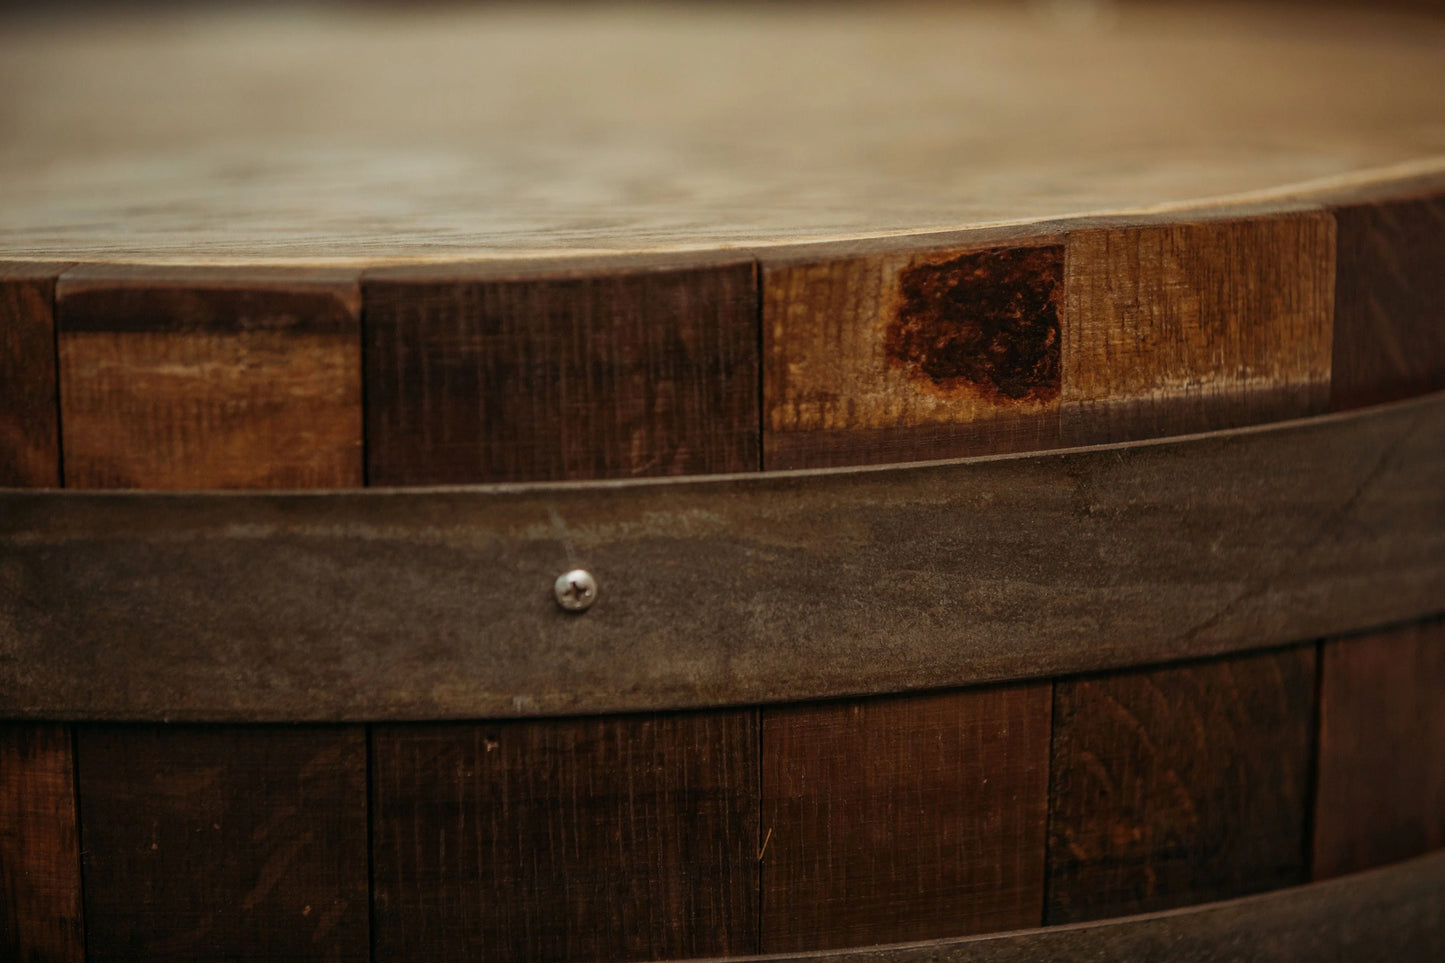 Close up of the wine barrel.